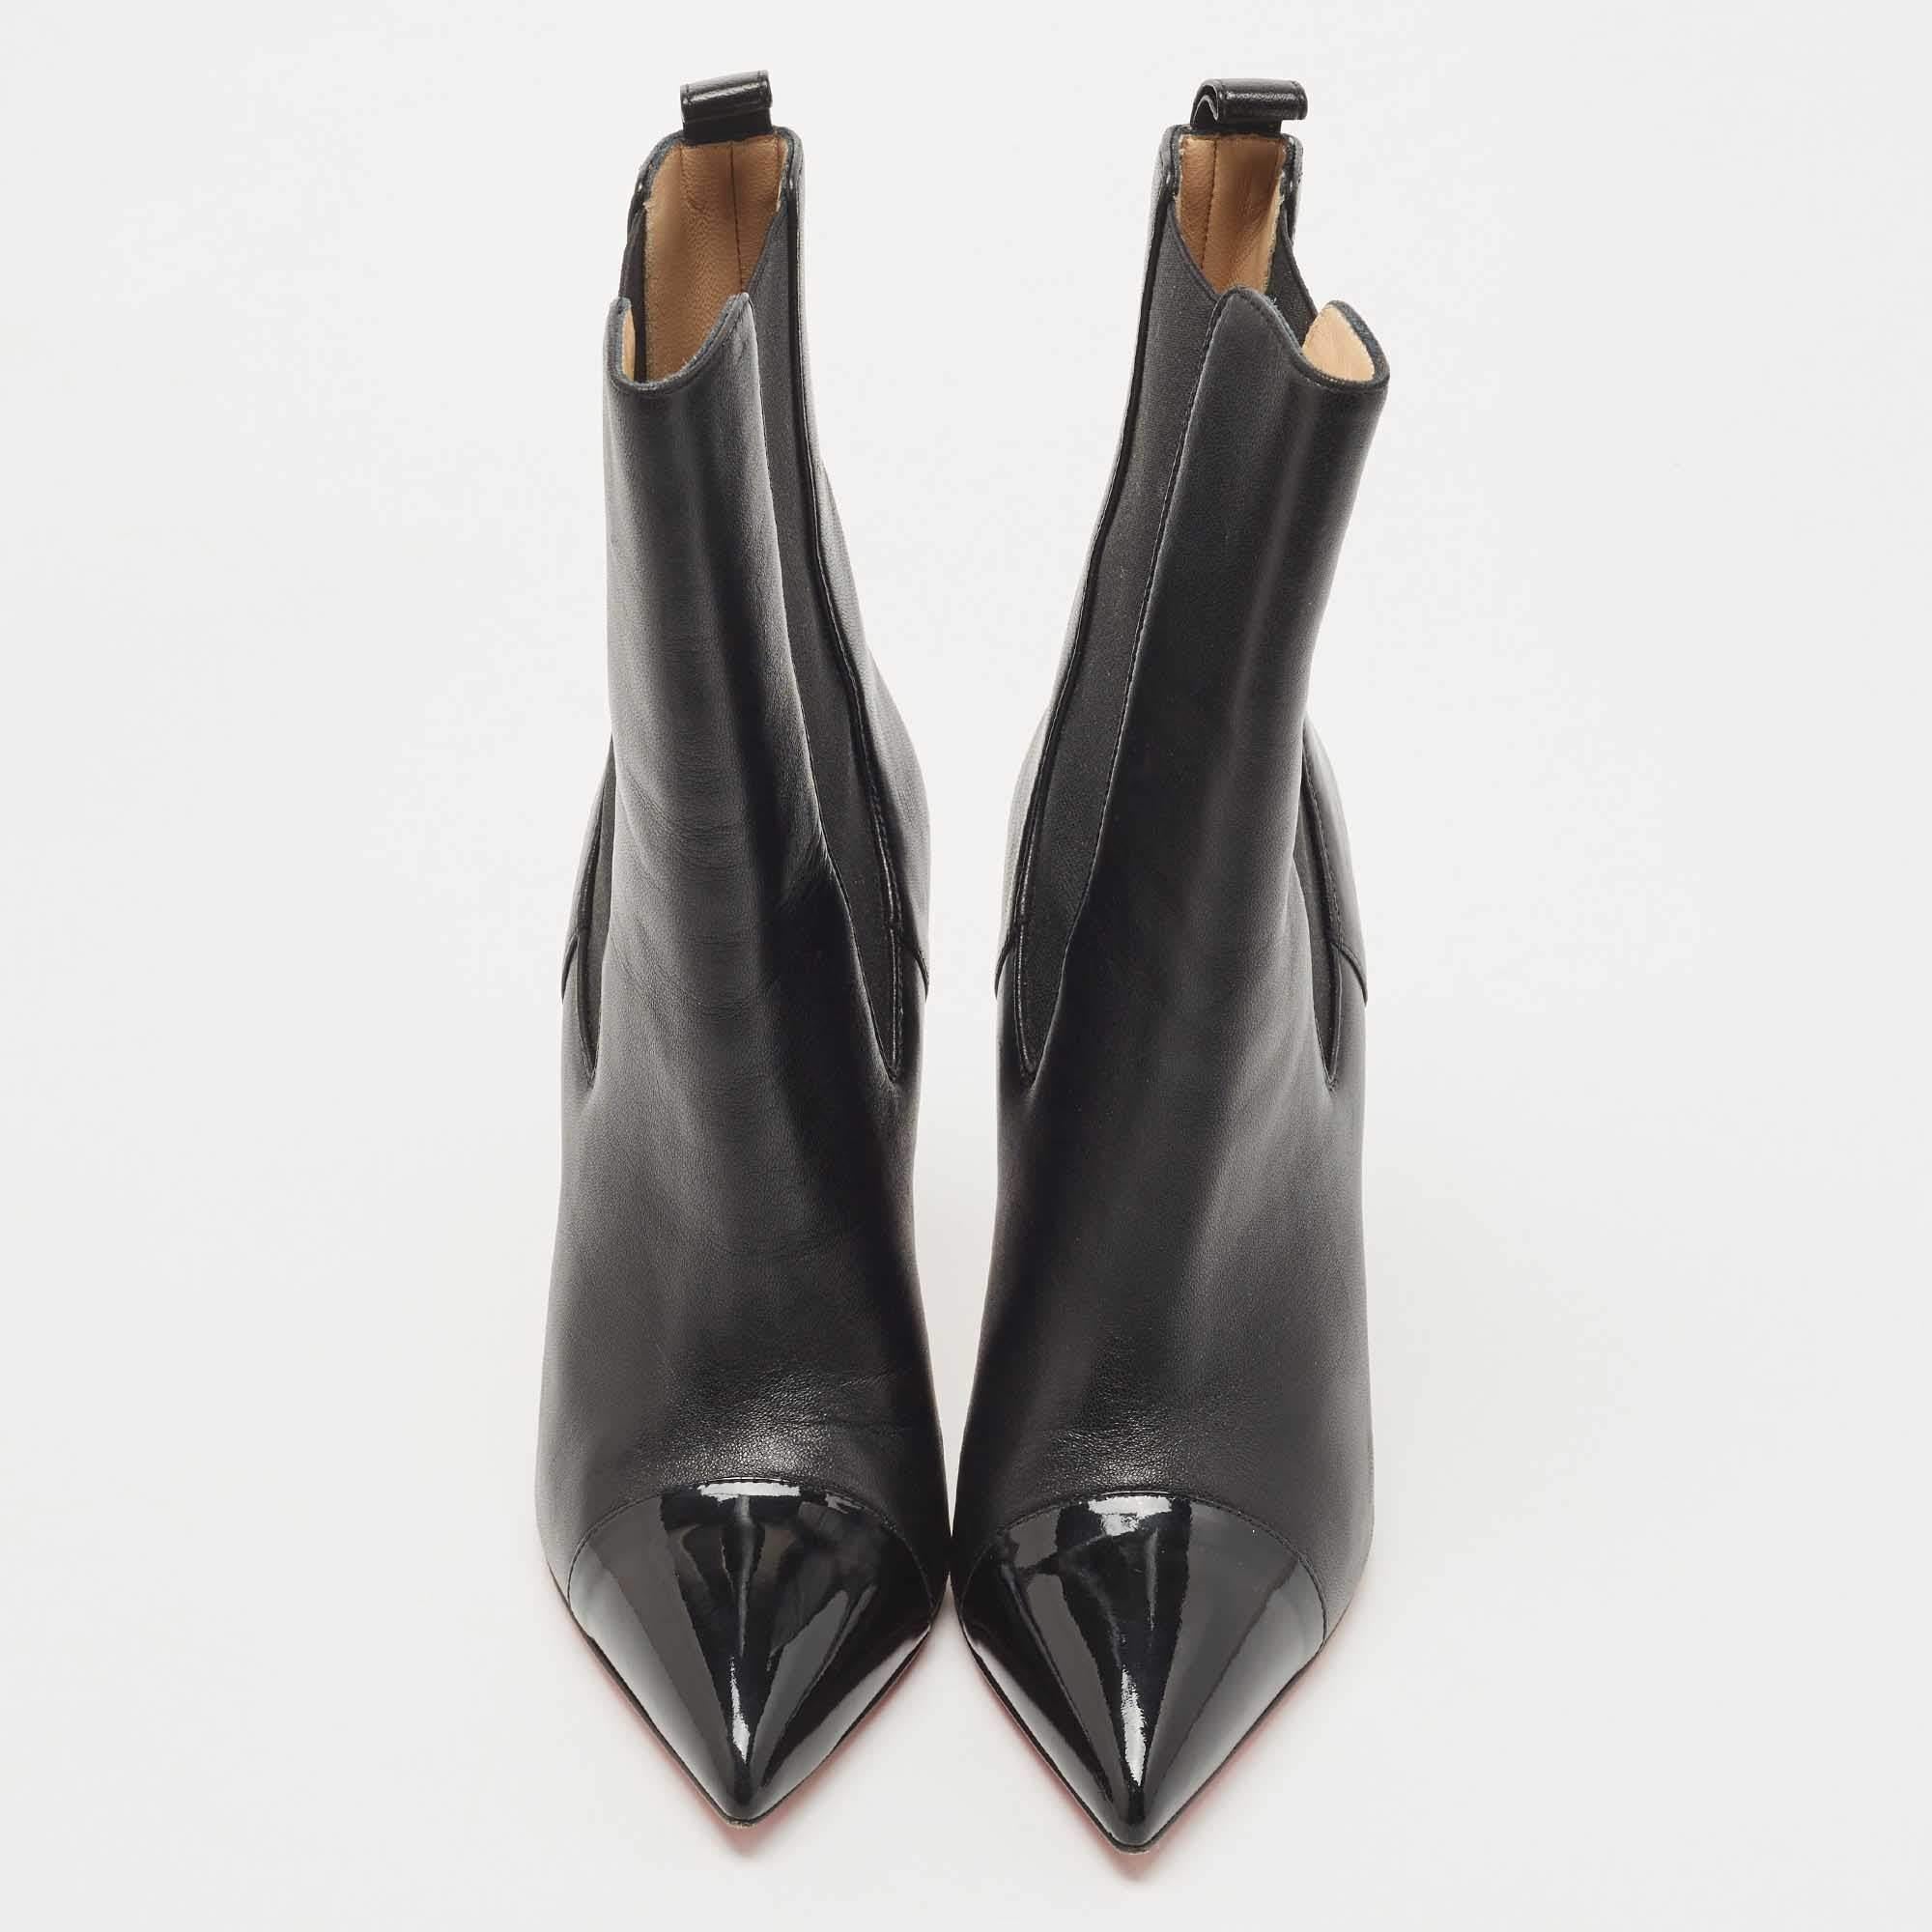 If the quest is for a pair of statement boots, we'll gladly choose this one by Christian Louboutin. The women's booties are crafted from leather and have shiny cap toes, elastic panels, red soles, and sleek heels.

